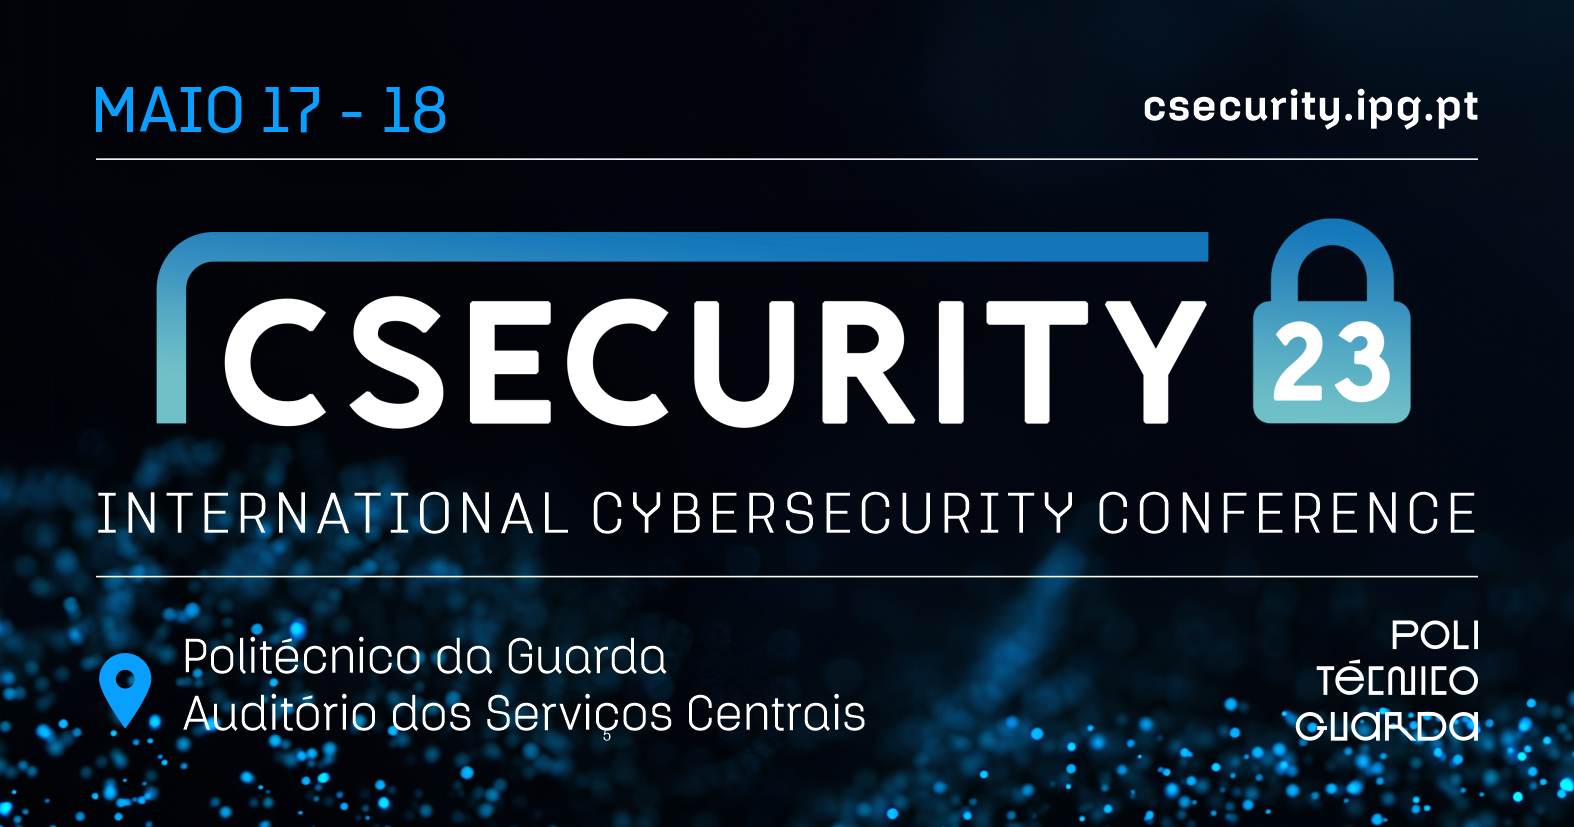 International Cybersecurity Conference